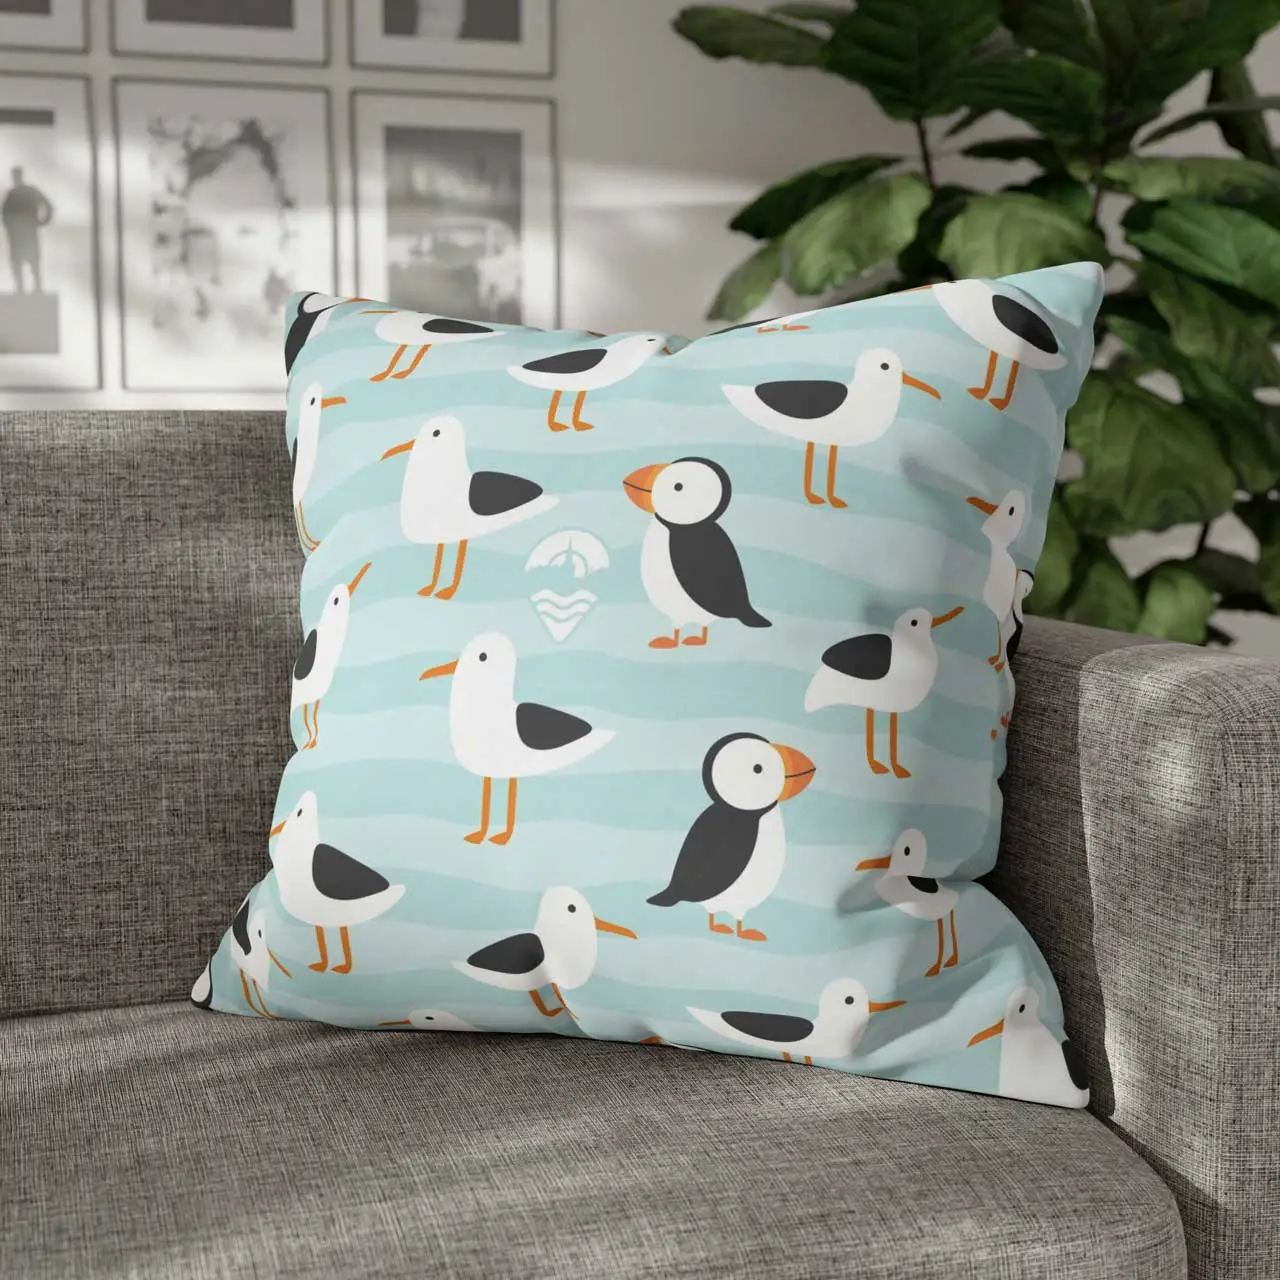 Around Tenby Puffins and Seagulls Cushion Covers